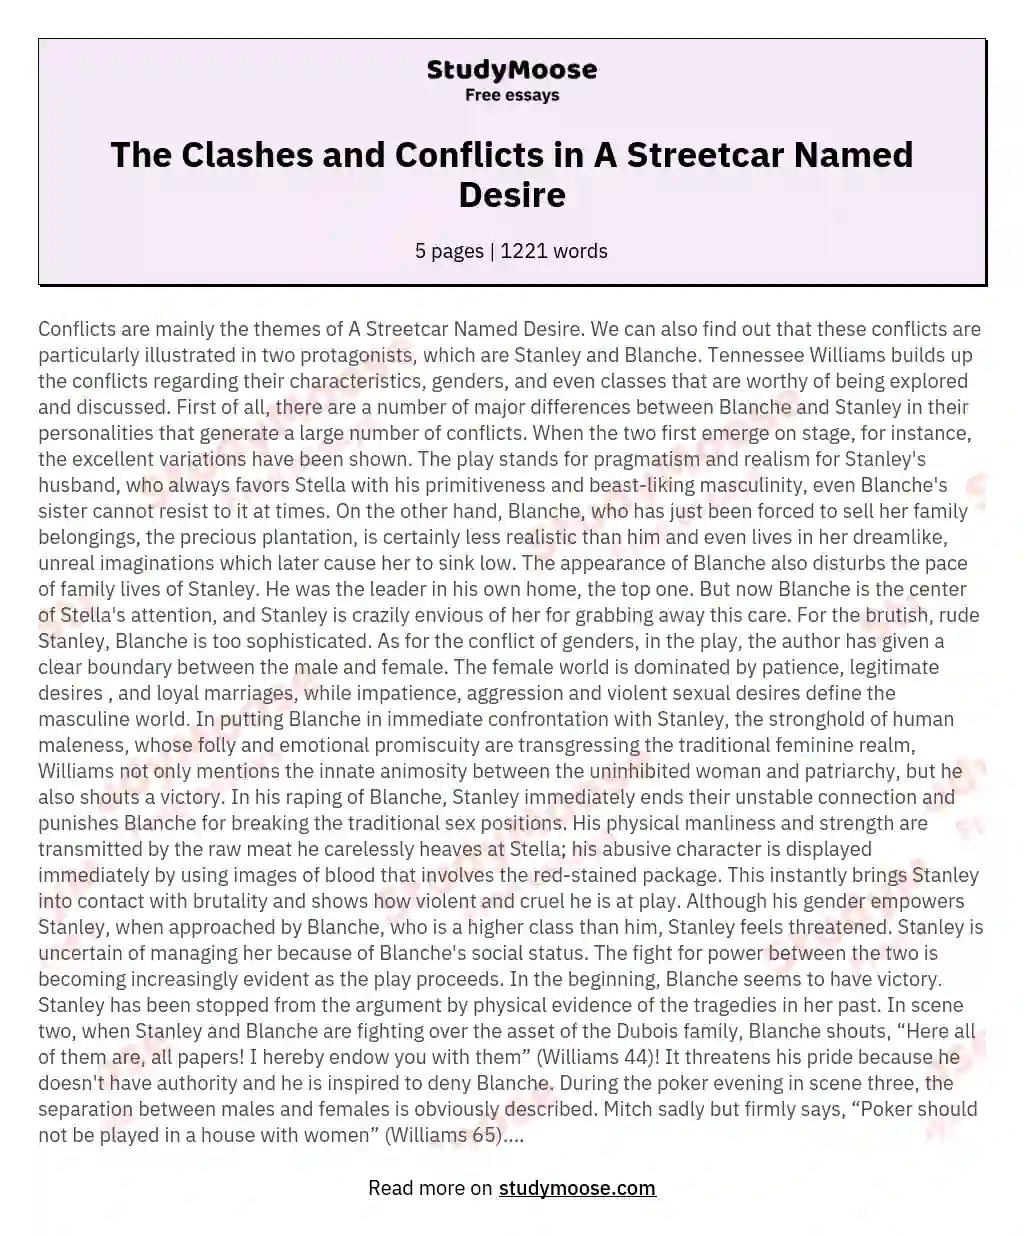 The Clashes and Conflicts in A Streetcar Named Desire